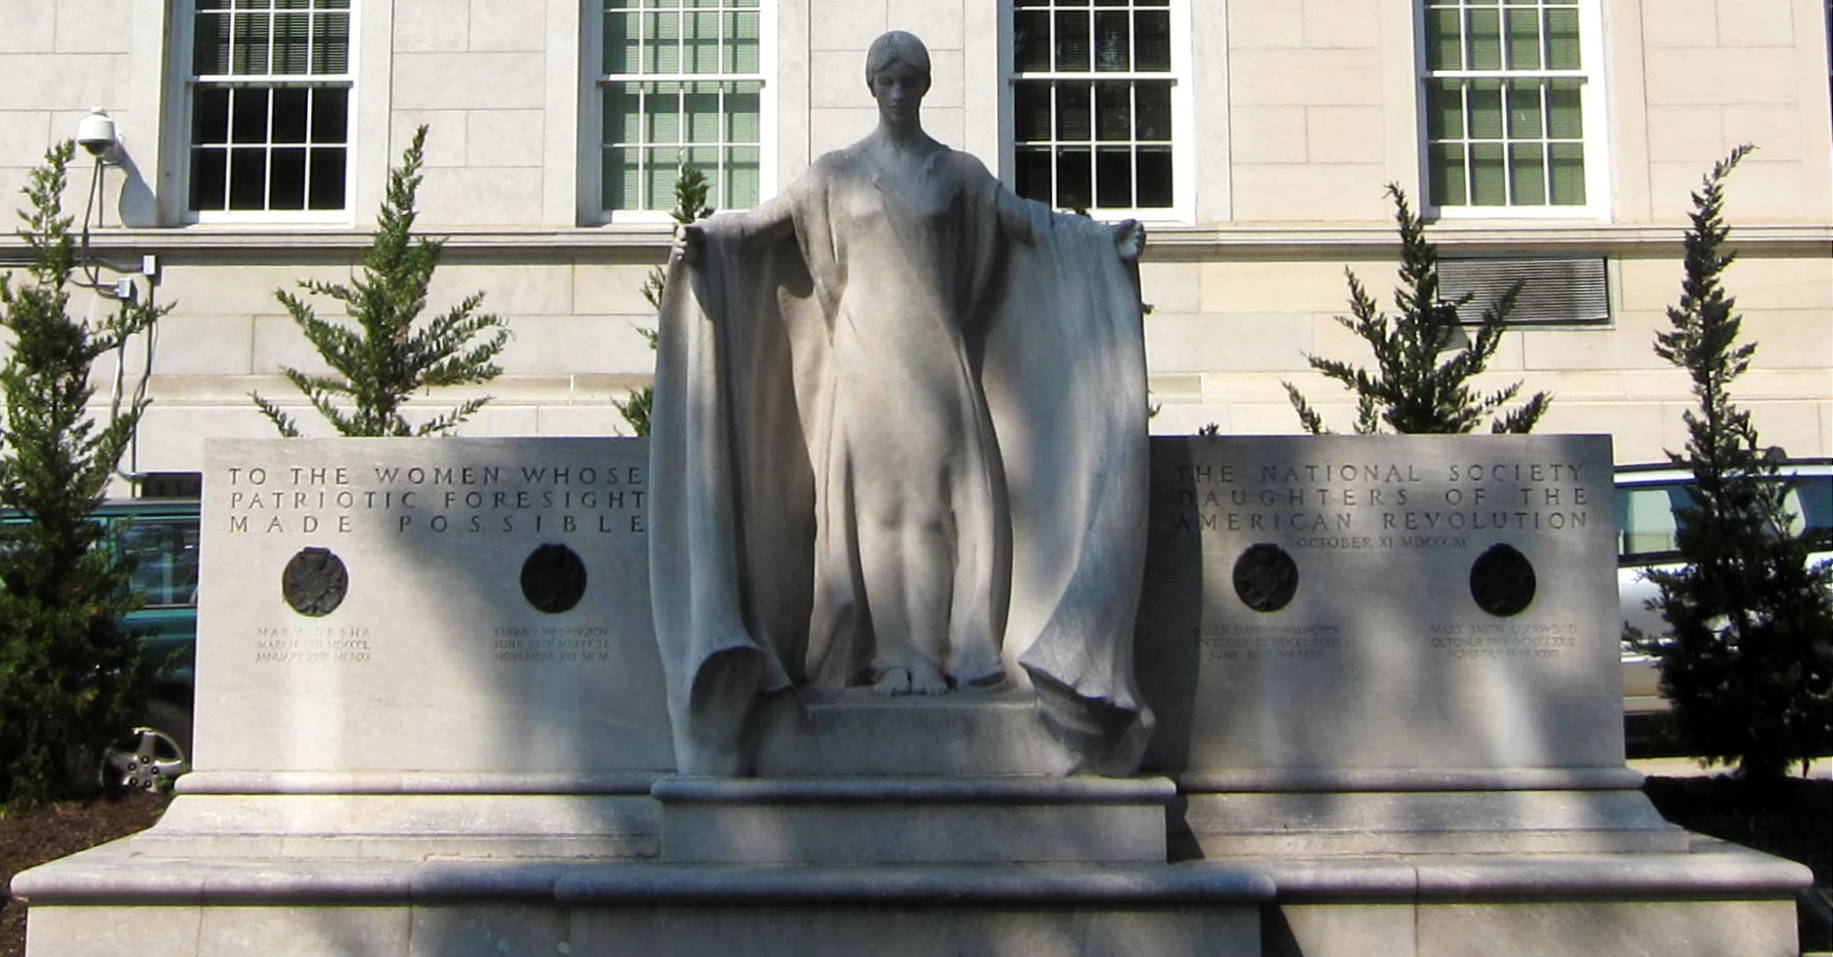 the sculpture Founders of the Daughters of the American Revolution in Washington, D.C.